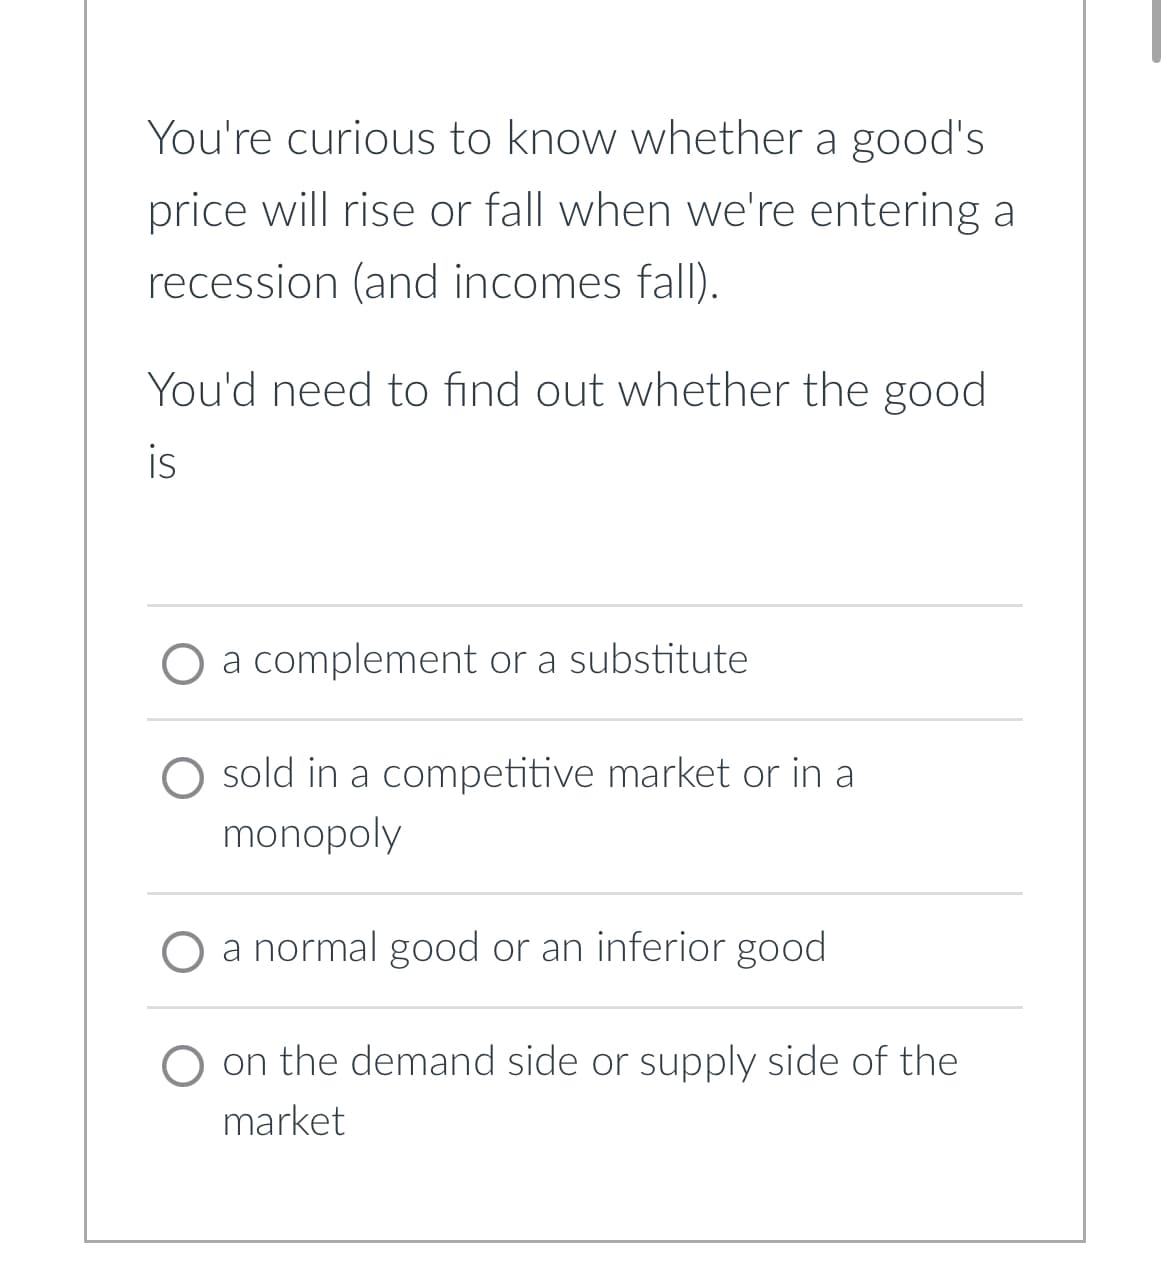 You're curious to know whether a good's
price will rise or fall when we're entering a
recession (and incomes fall).
You'd need to find out whether the good
is
O a complement or a substitute
O sold in a competitive market or in a
monopoly
a normal good or an inferior good
on the demand side or supply side of the
market